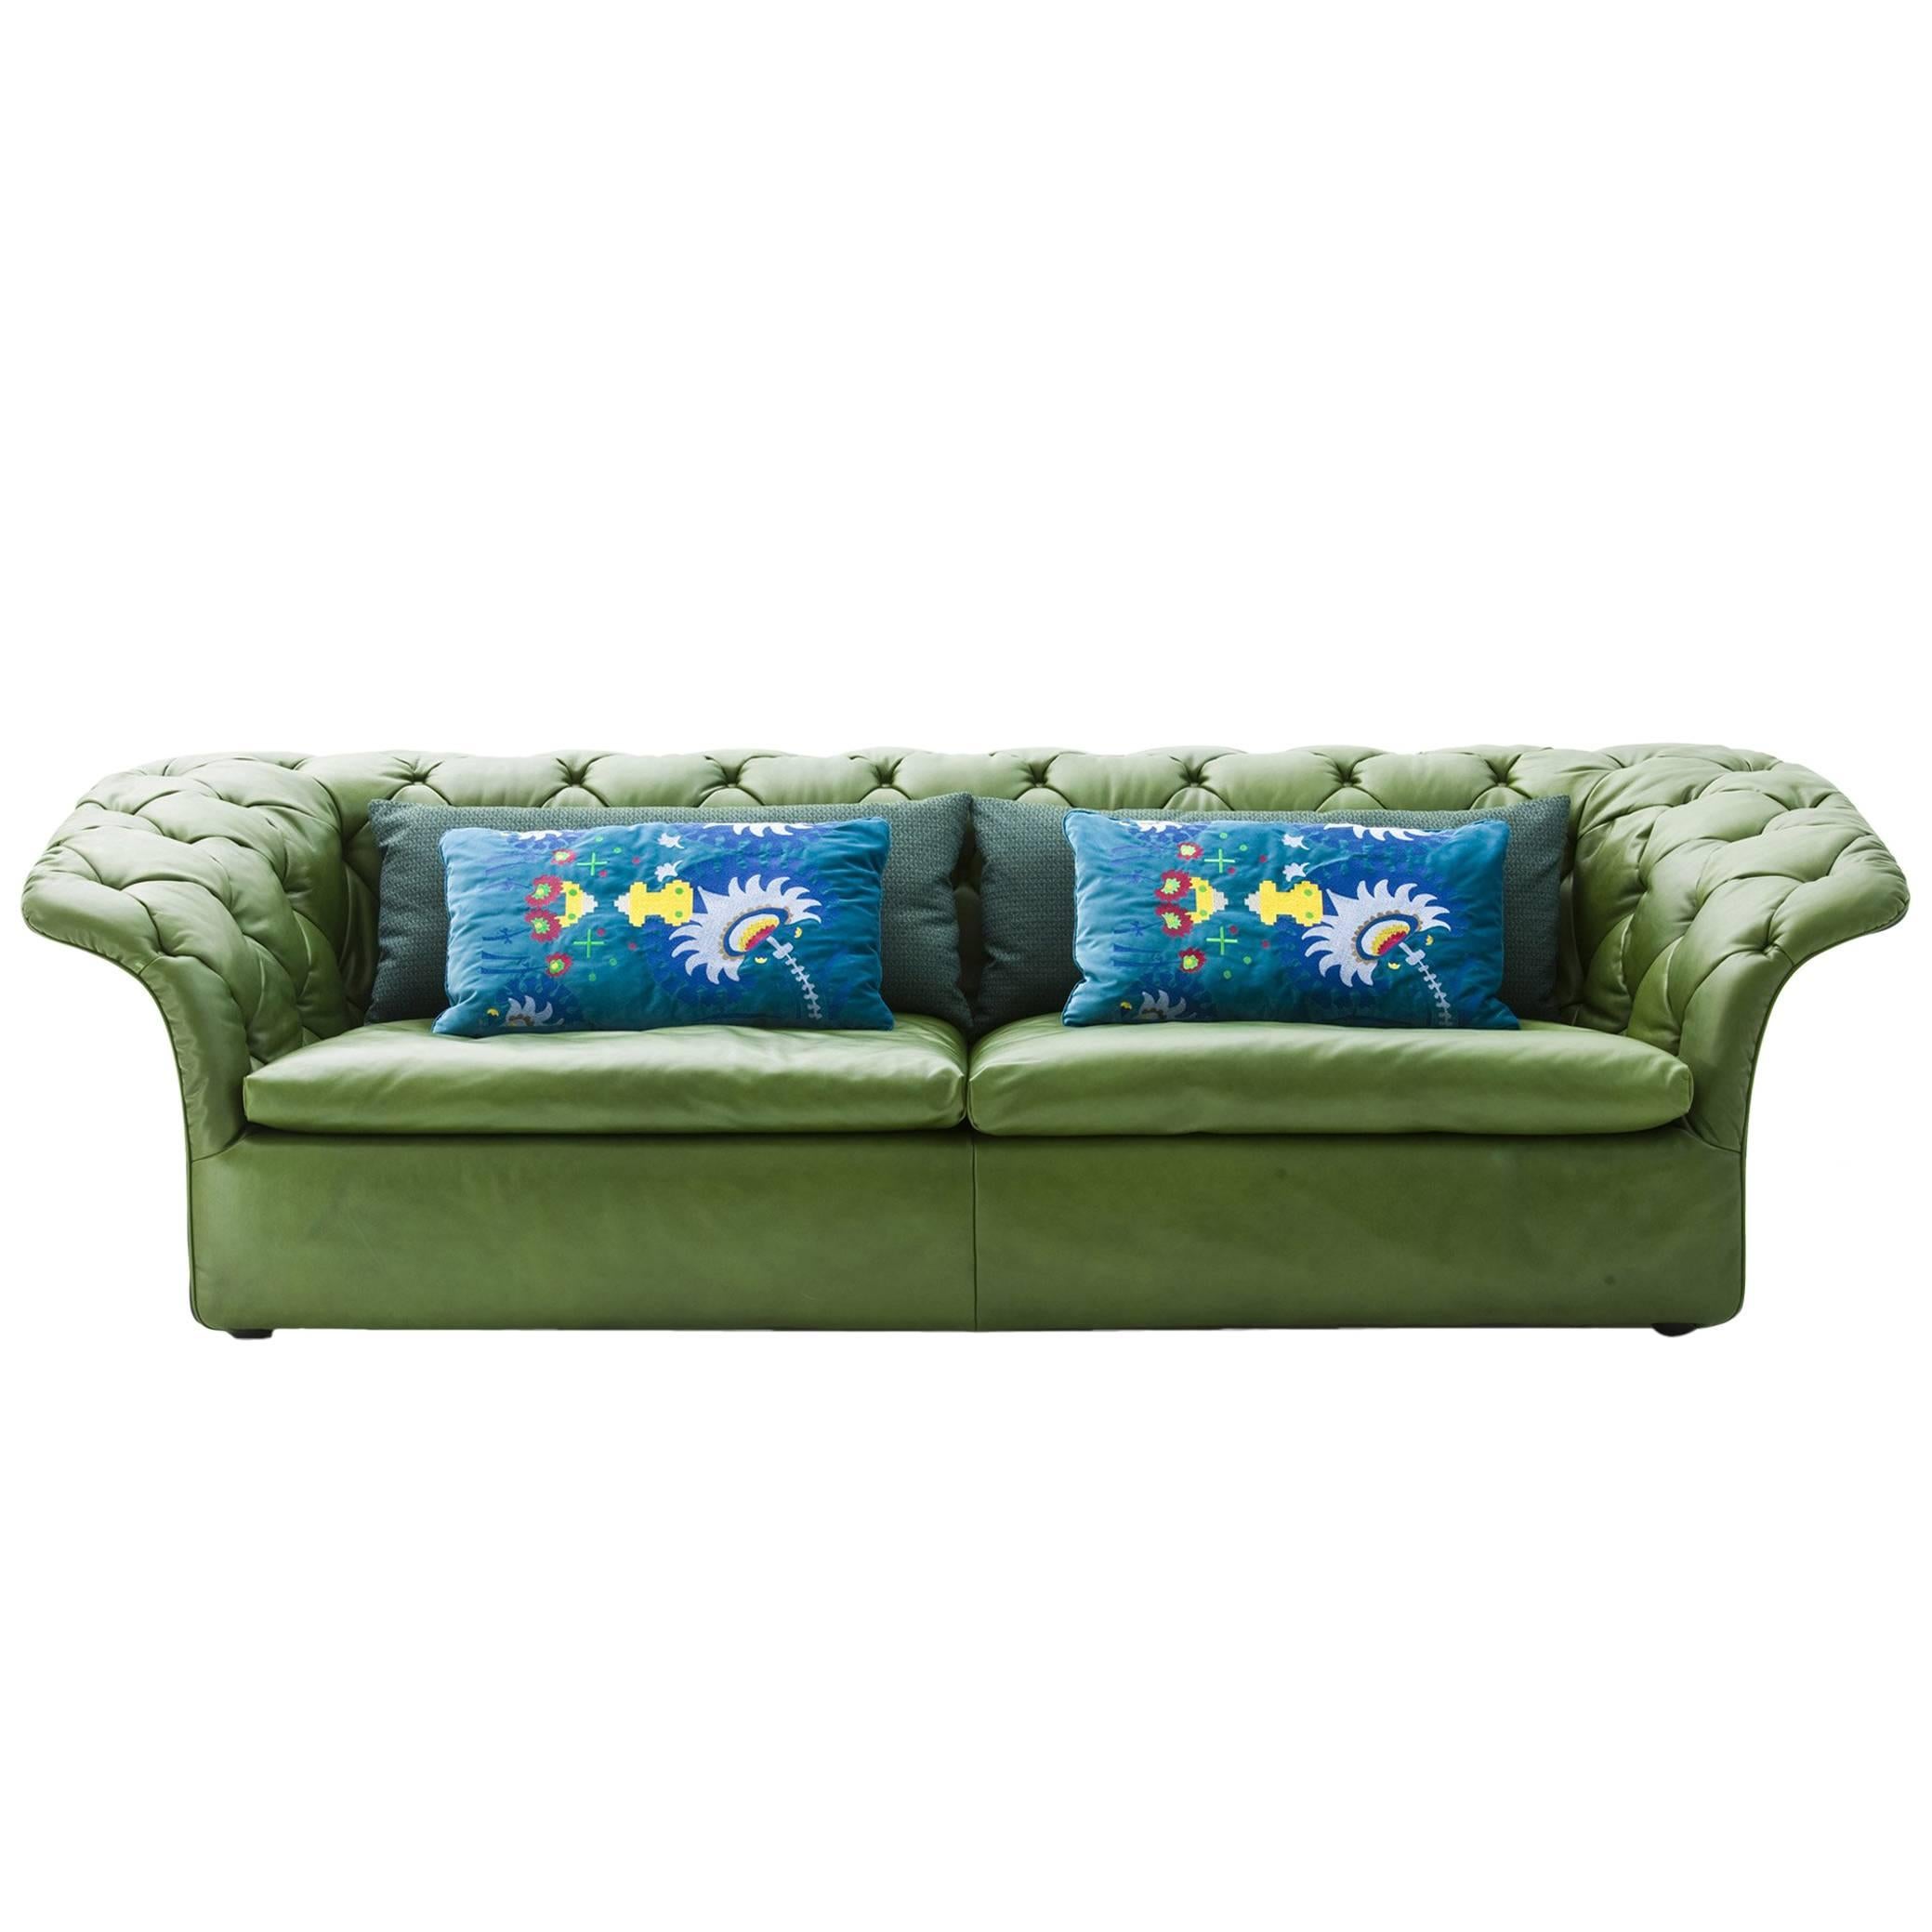 Moroso Bohemian Three-Seat Sofa in Tufted Leather by Patricia Urquiola For Sale